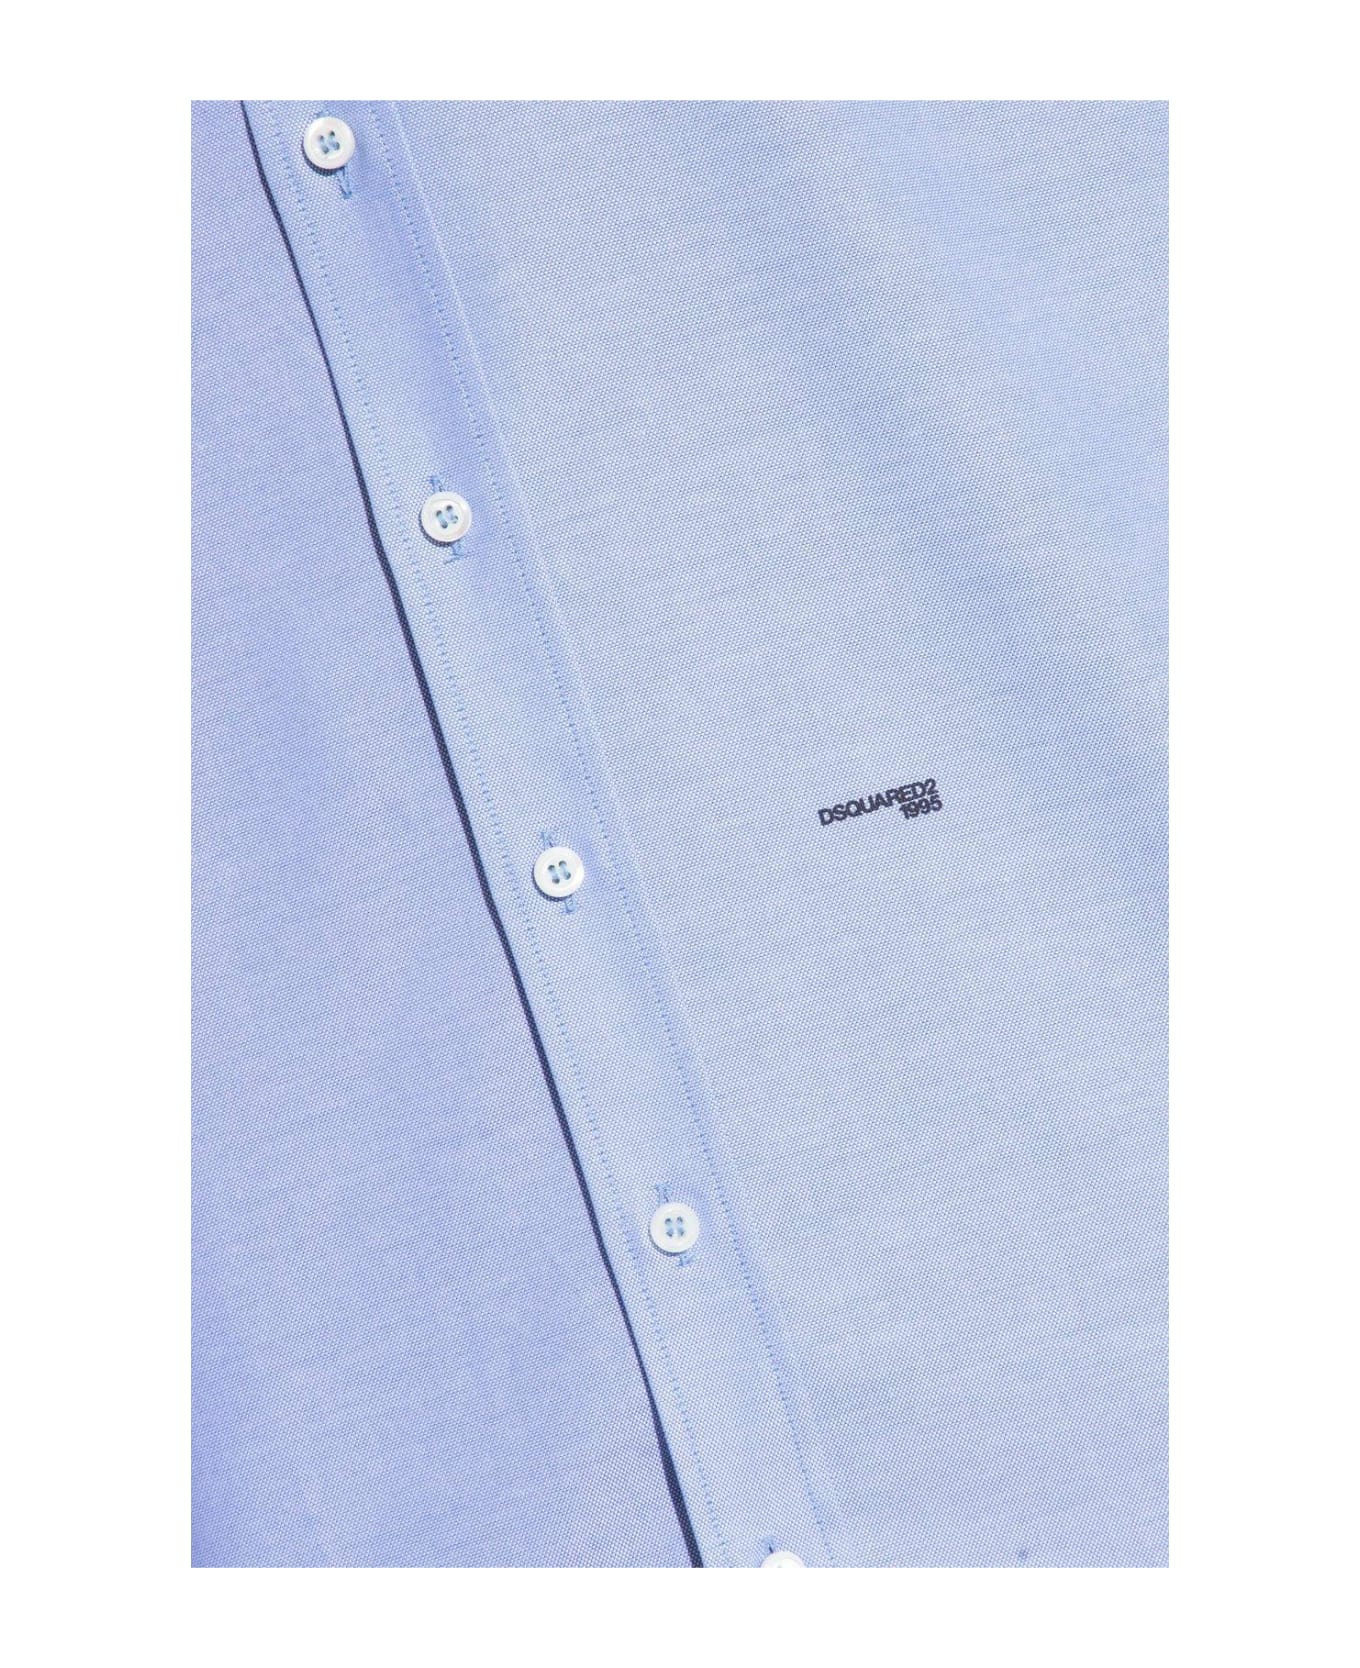 Dsquared2 Logo-printed Long-sleeved Button-up Shirt - Clear Blue